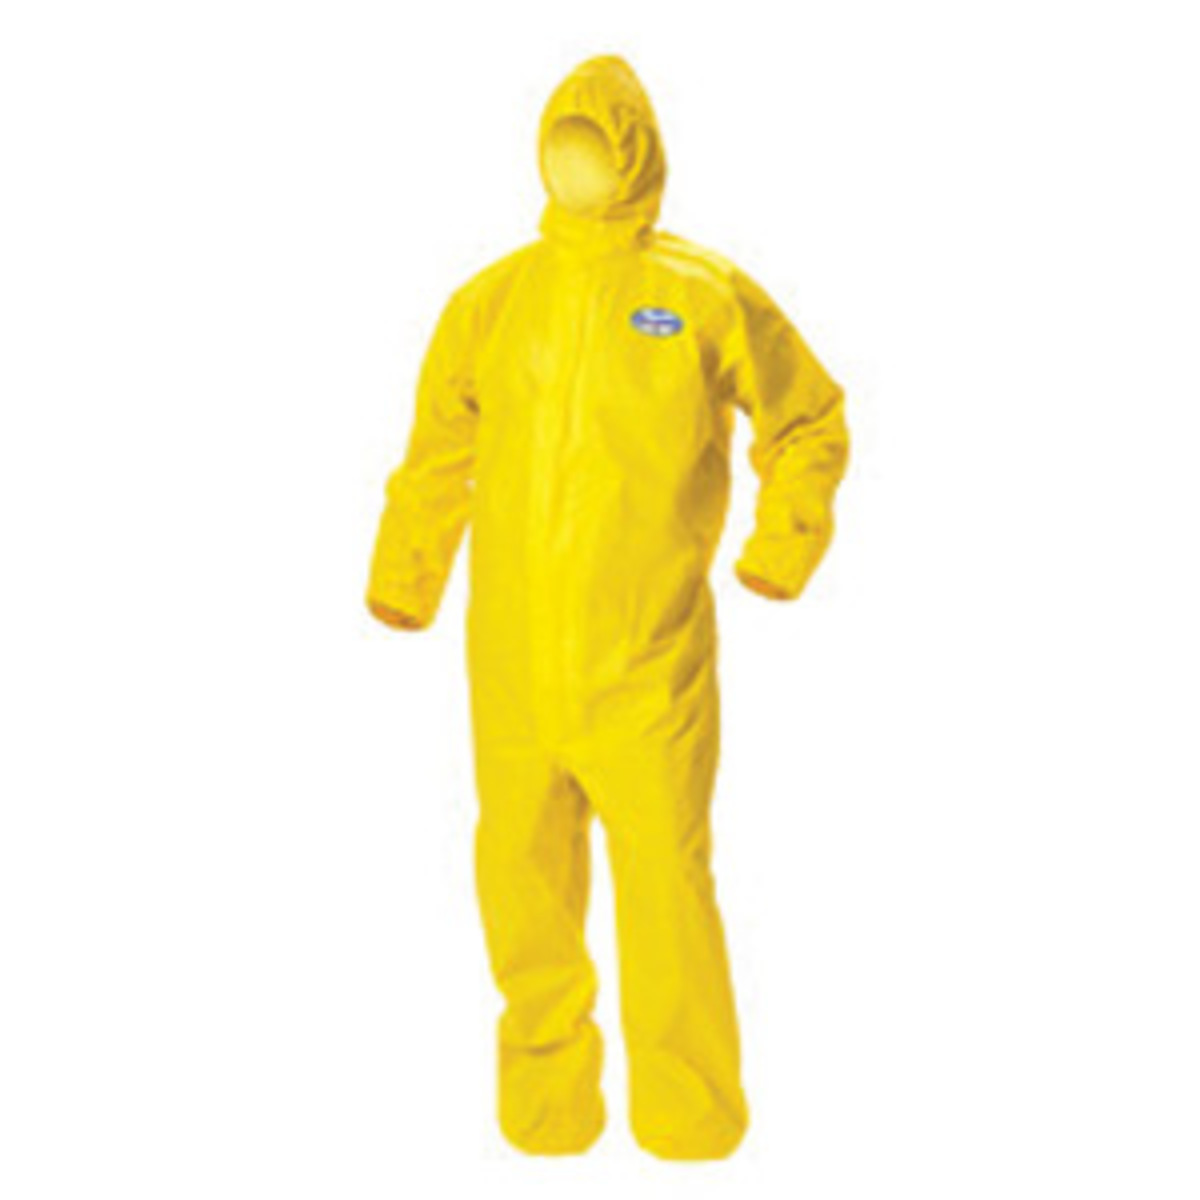 Kimberly-Clark Professional* Size 5X Yellow KleenGuard* A70 1.5 mil Polypropylene Coveralls (Availability restrictions apply.)